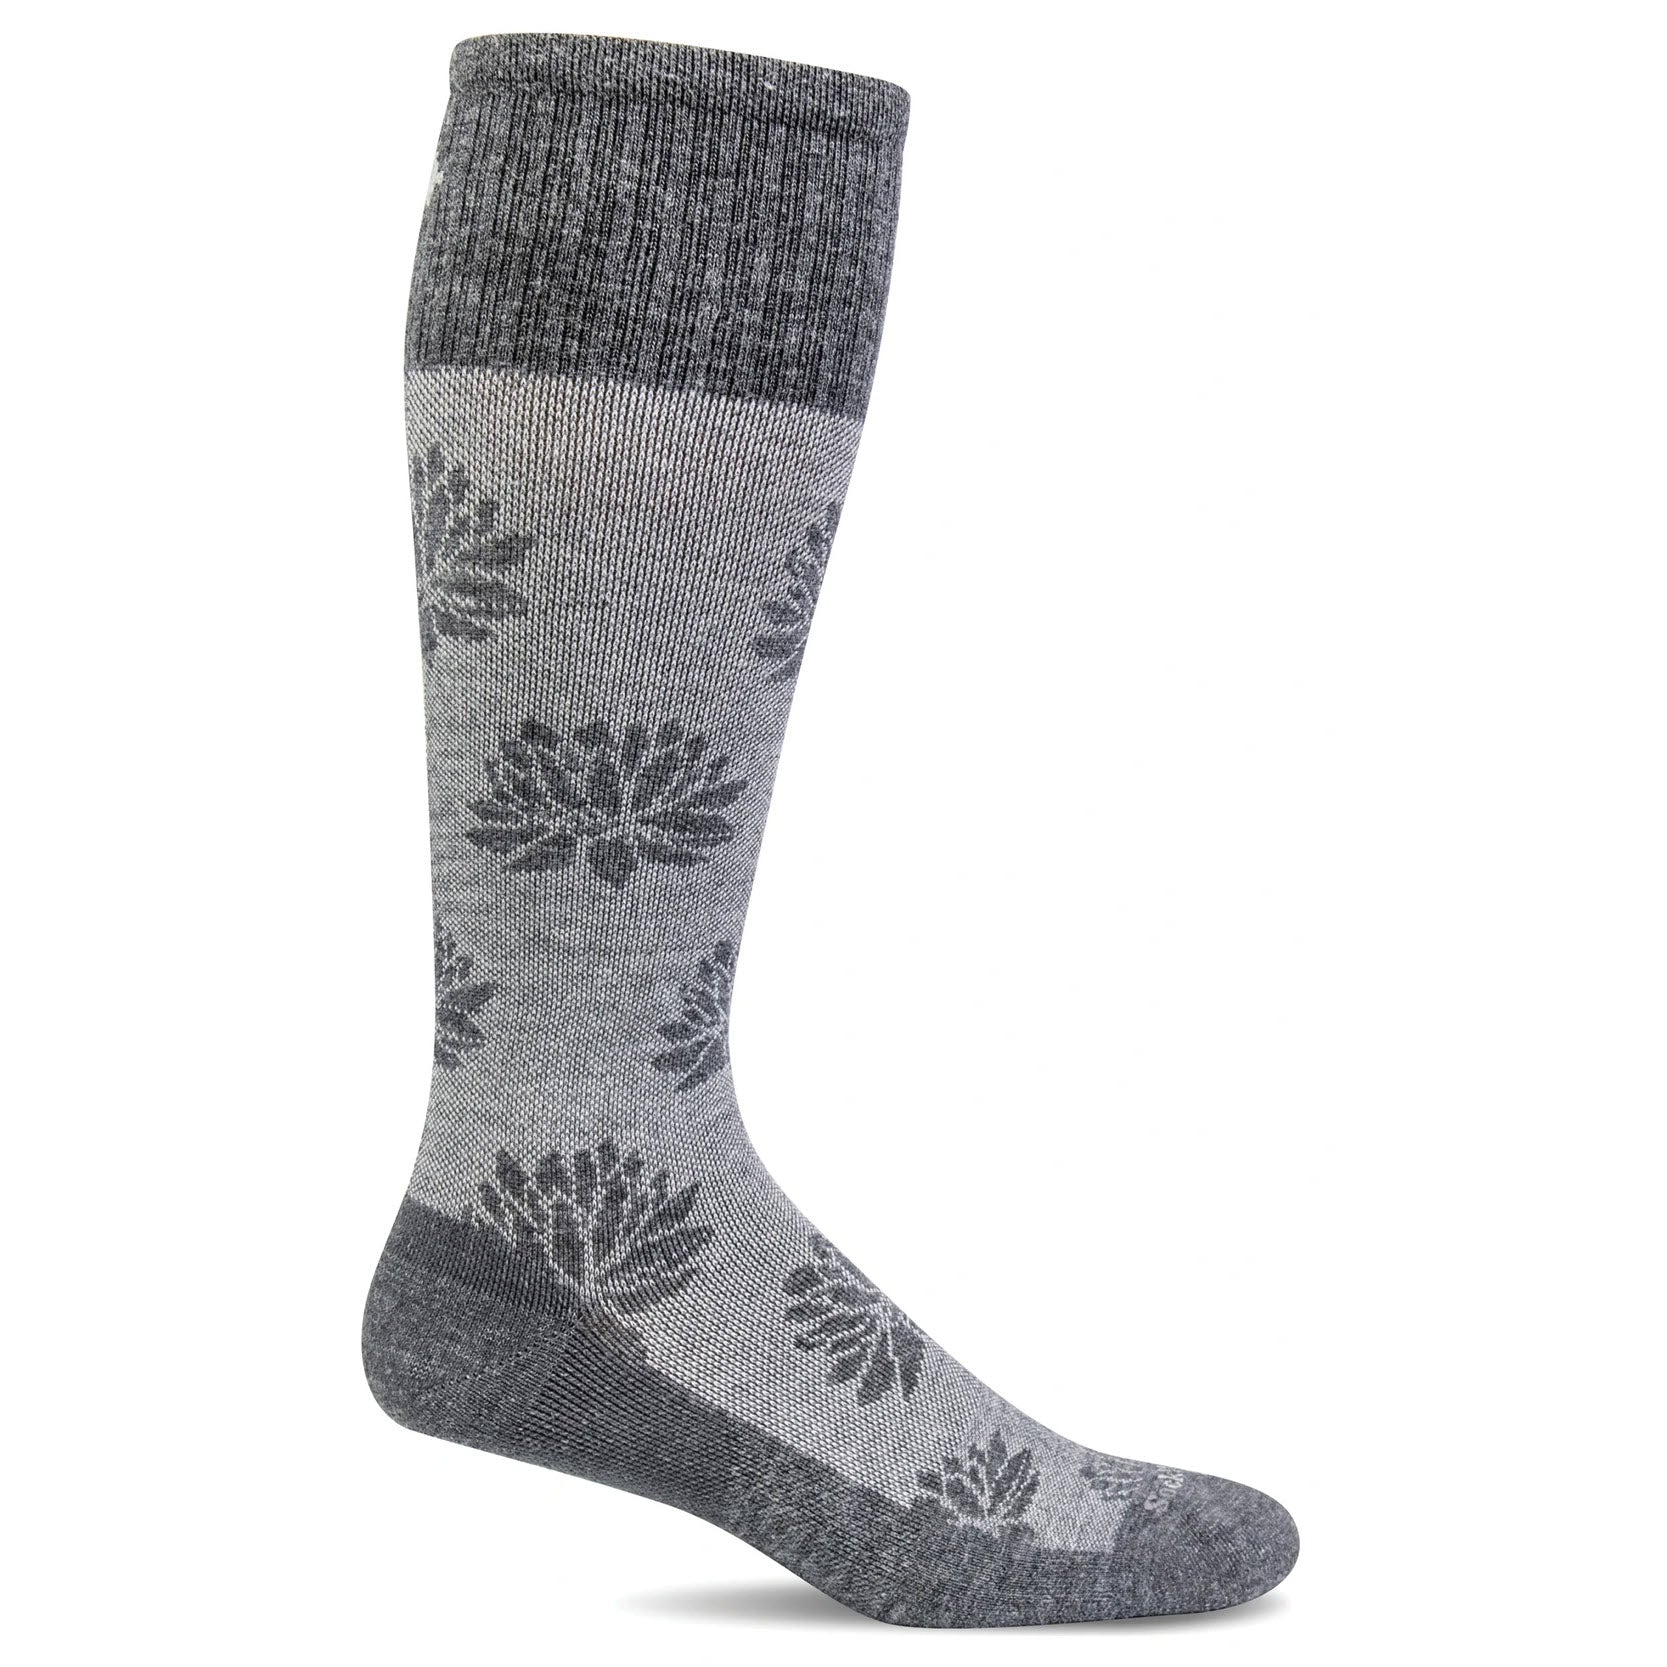 Graduated Sockwell Lotus Lift Charcoal 20-30mmHg compression socks with gray patterned floral design isolated on a white background.